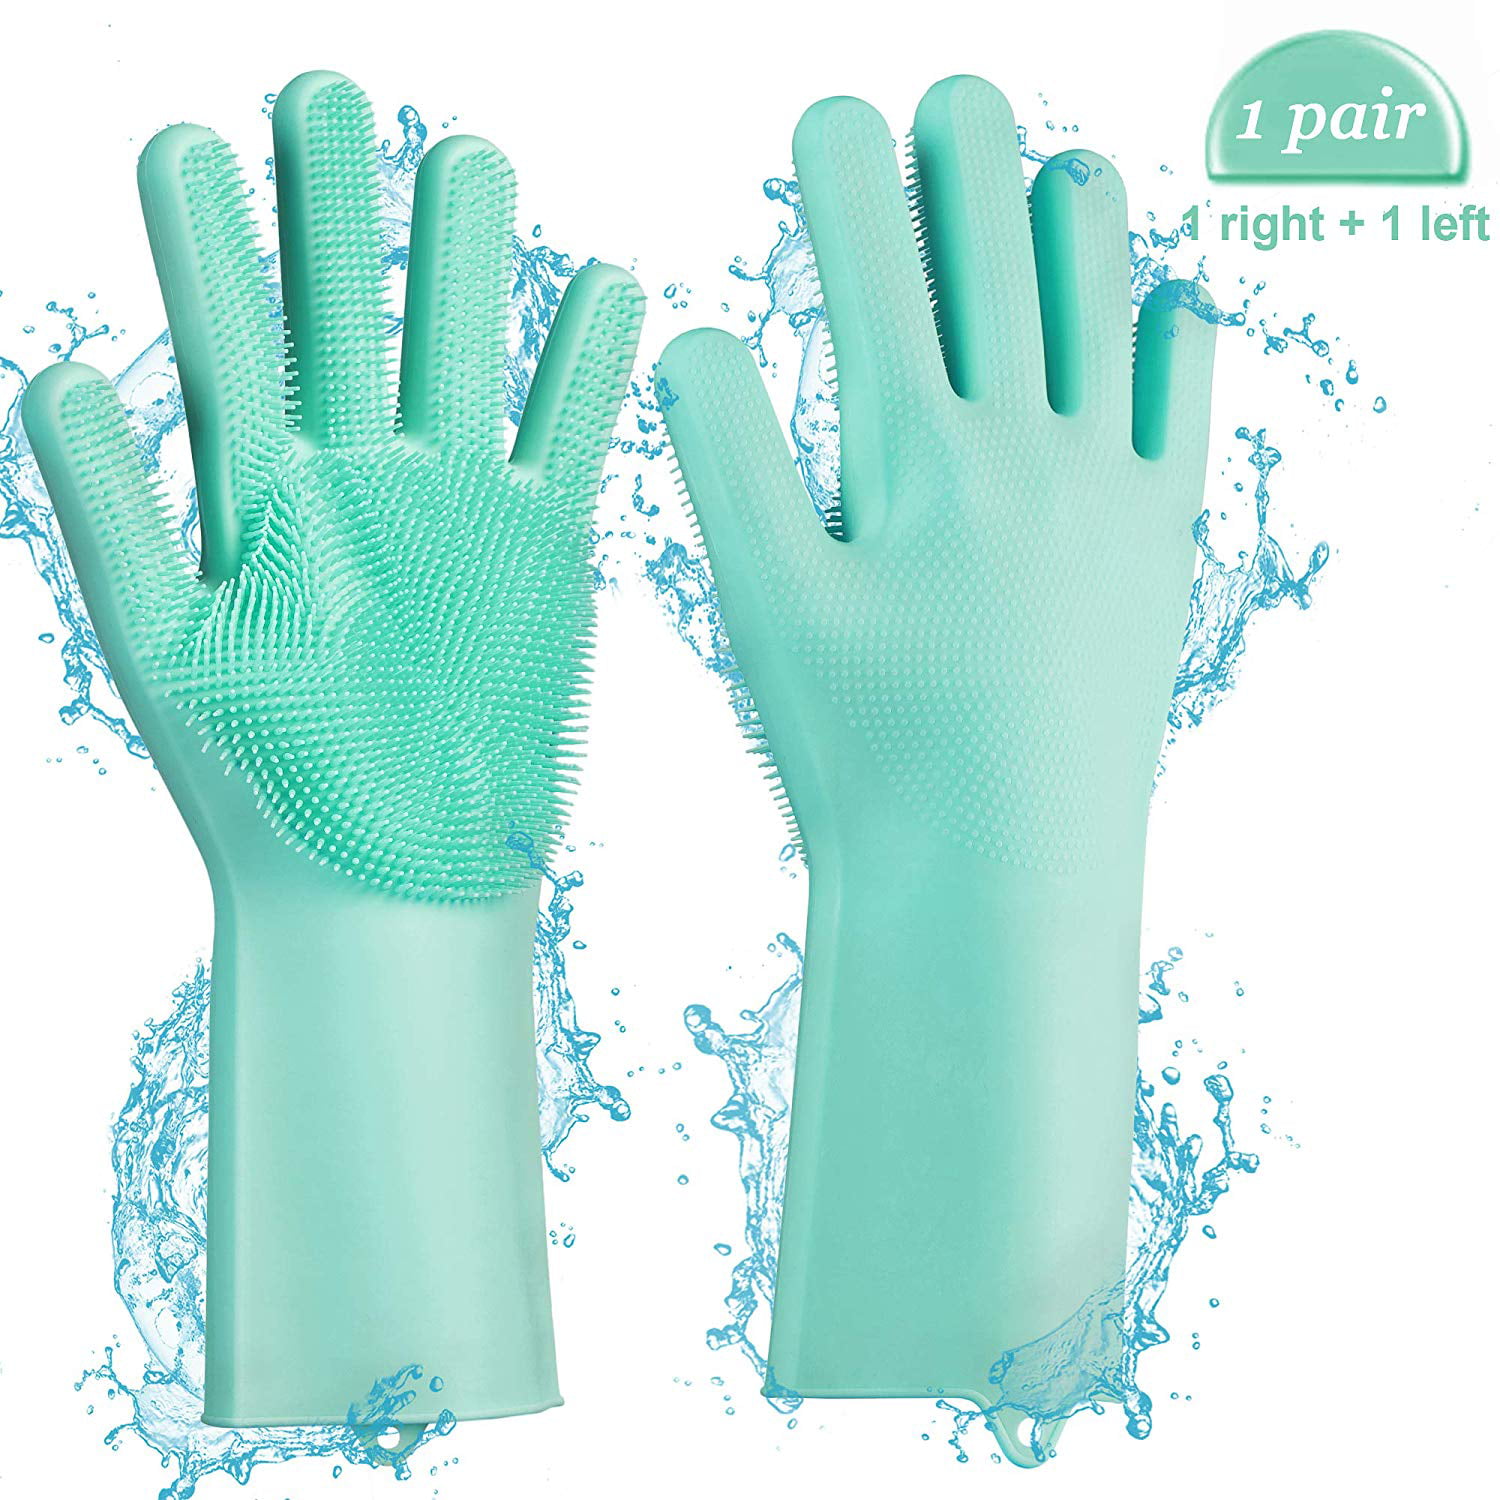 Heat Resistant Reusable Cleaning Gloves for Kitchen Car KOBWA Silicone Gloves Magic Dishwashing Gloves with Scrubber Pet Care 1 Pair Bathroom 